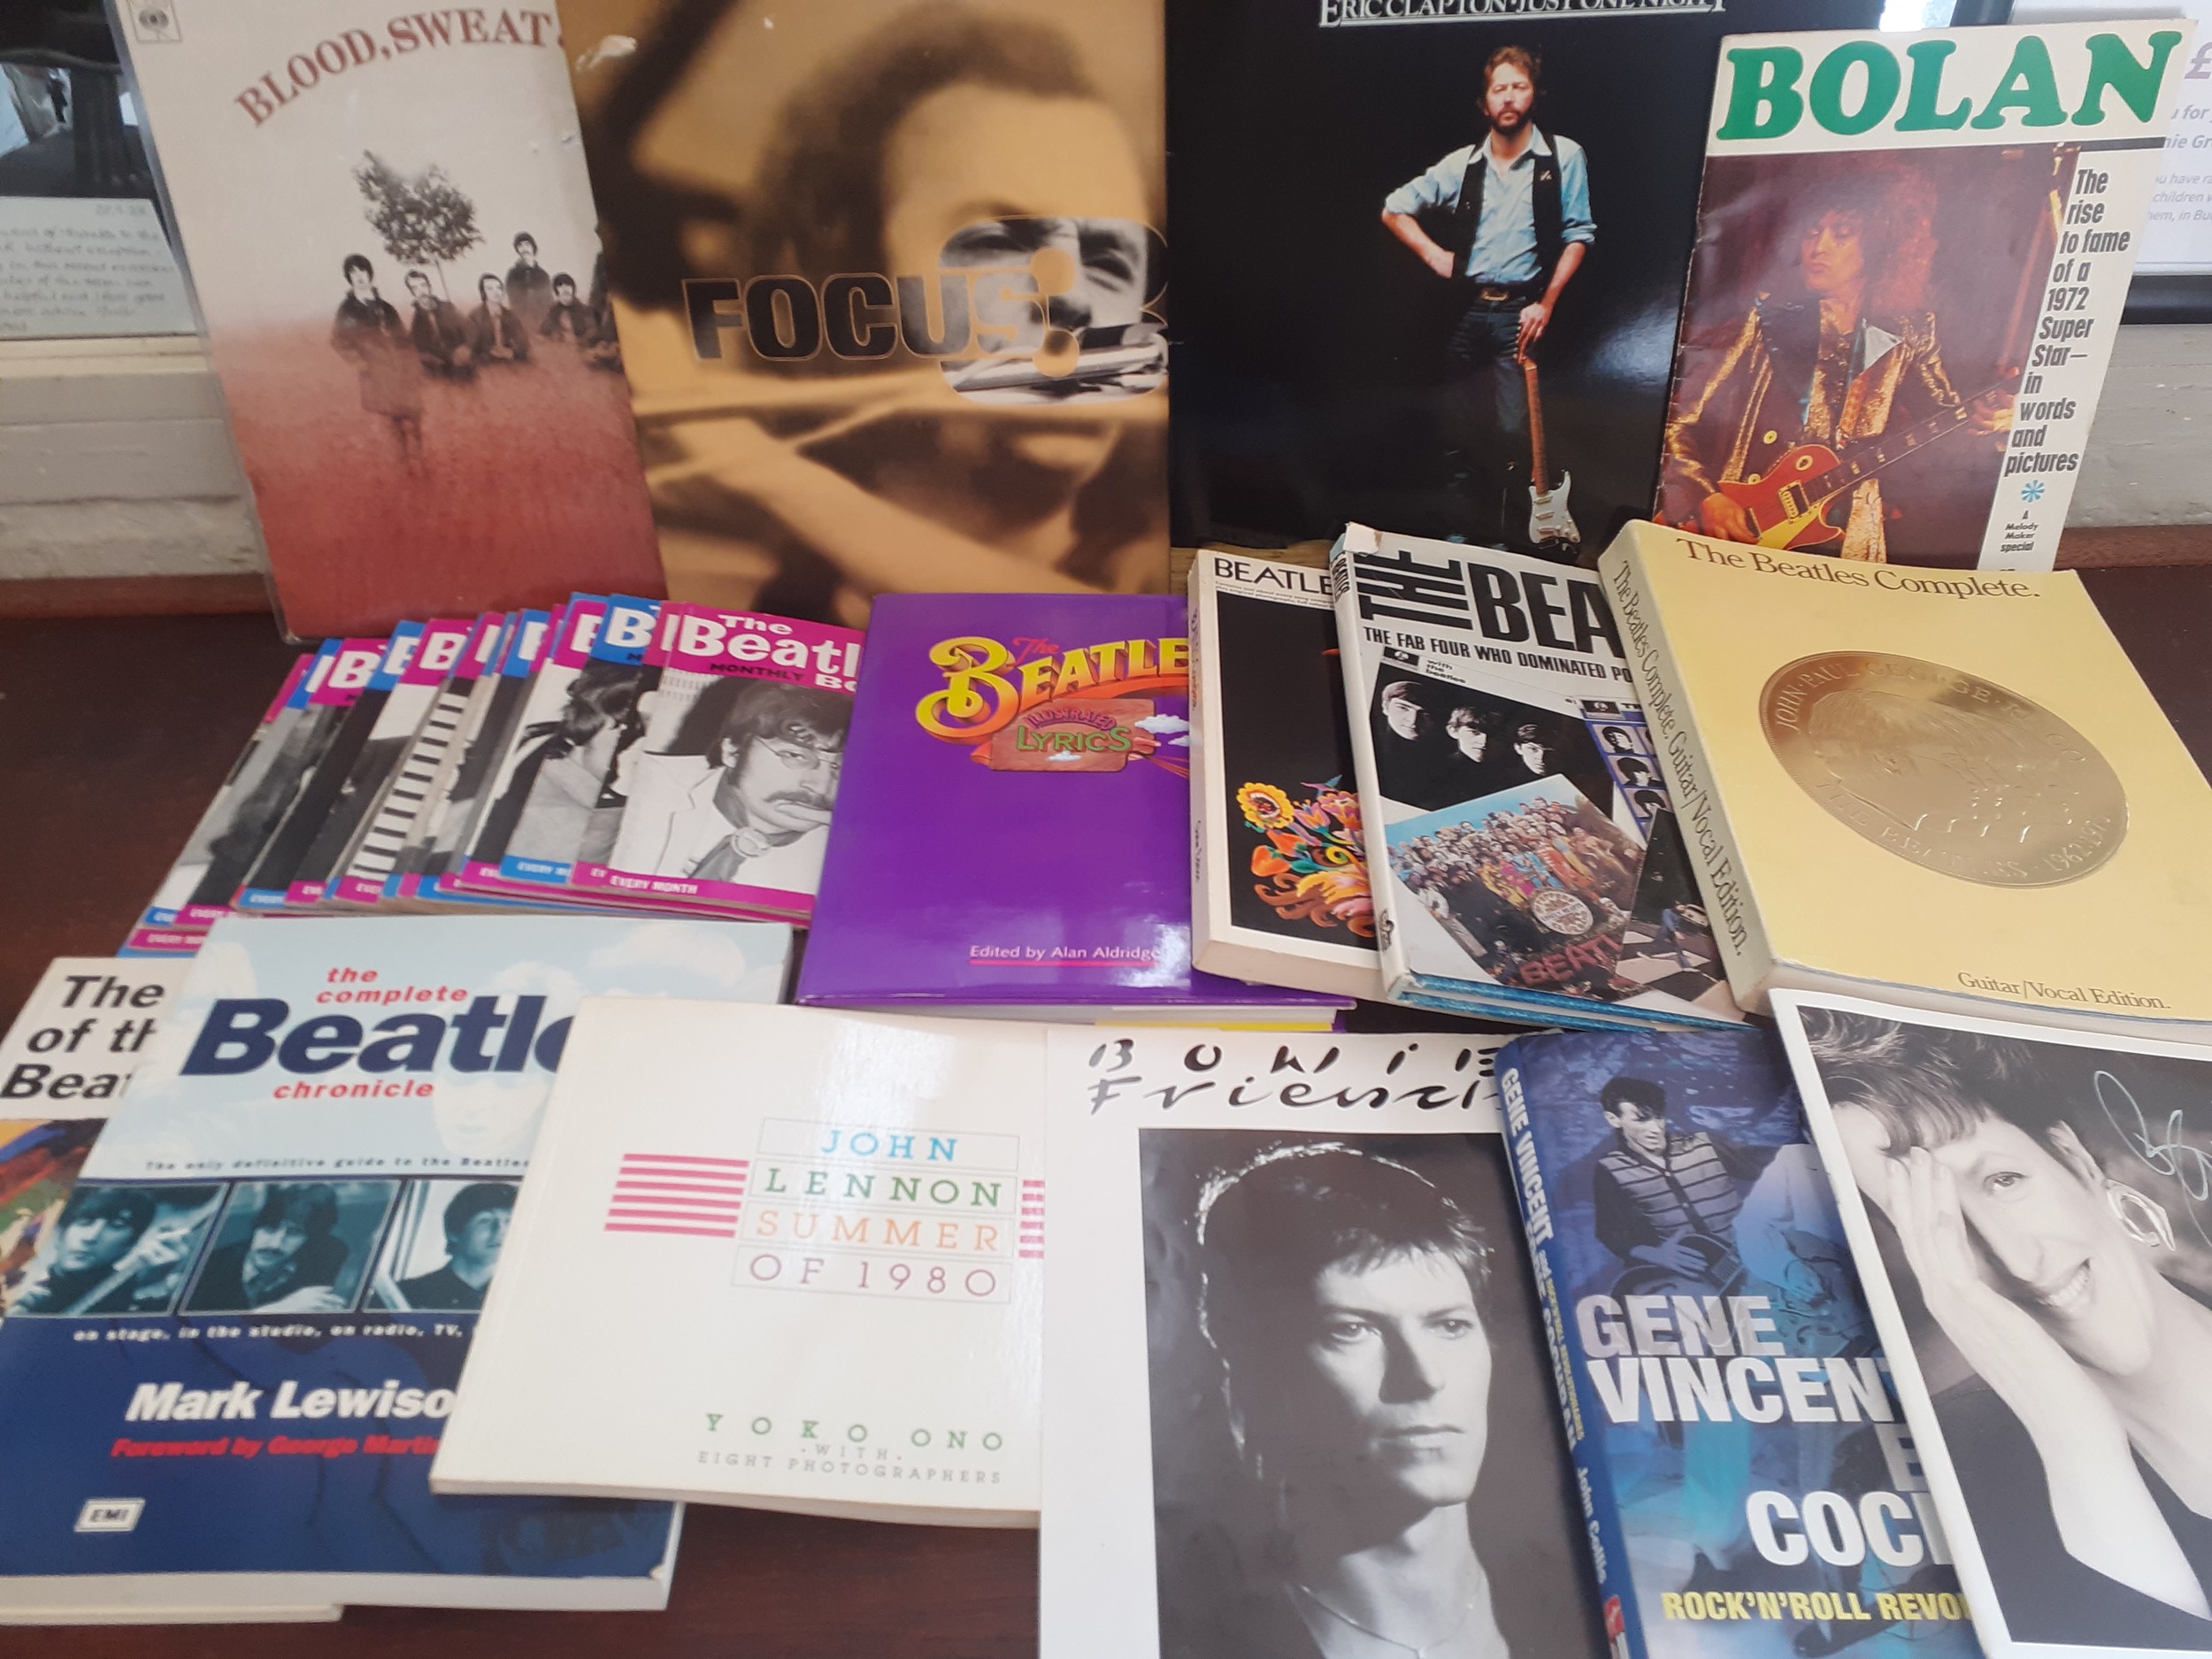 A quantity of 15 vintage LP's and music memorabilia to include The Who, Animals, David Bowie, - Image 3 of 5